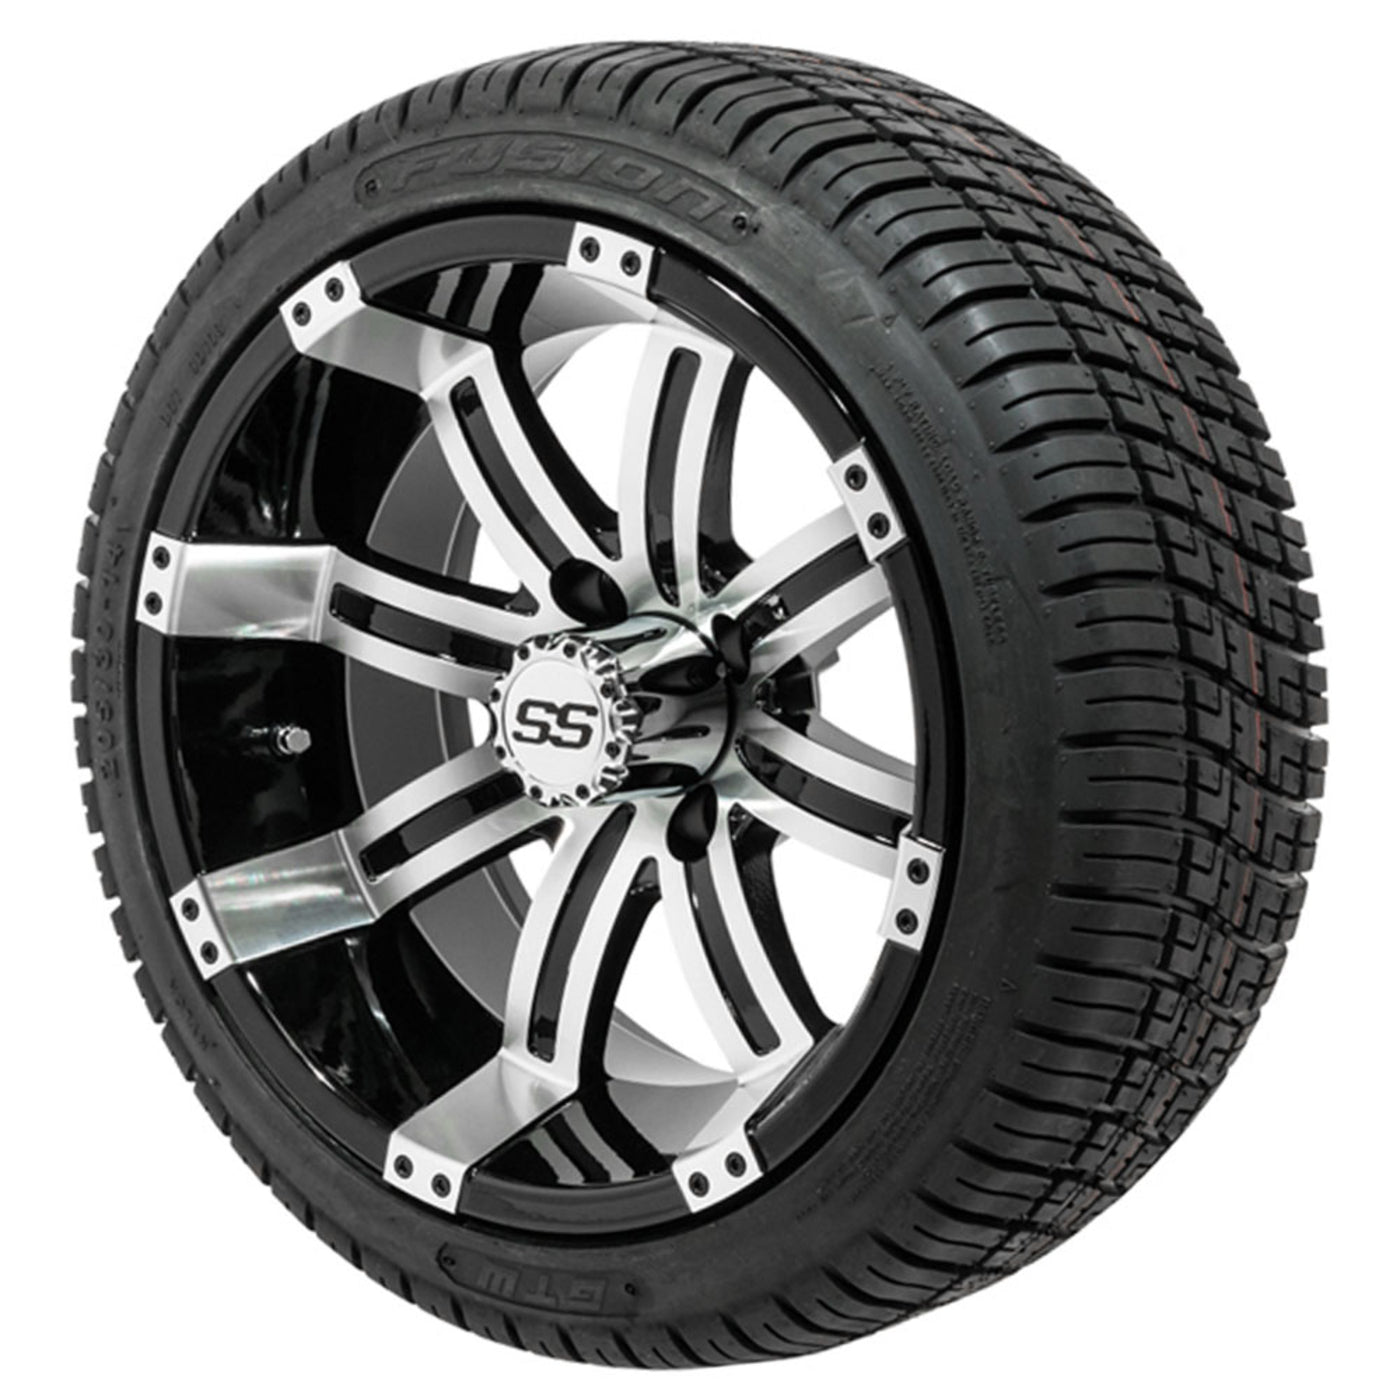 14" GTW Tempest Black and Machined Wheels with 18" Fusion DOT Street Tires "‚Äú Set of 4